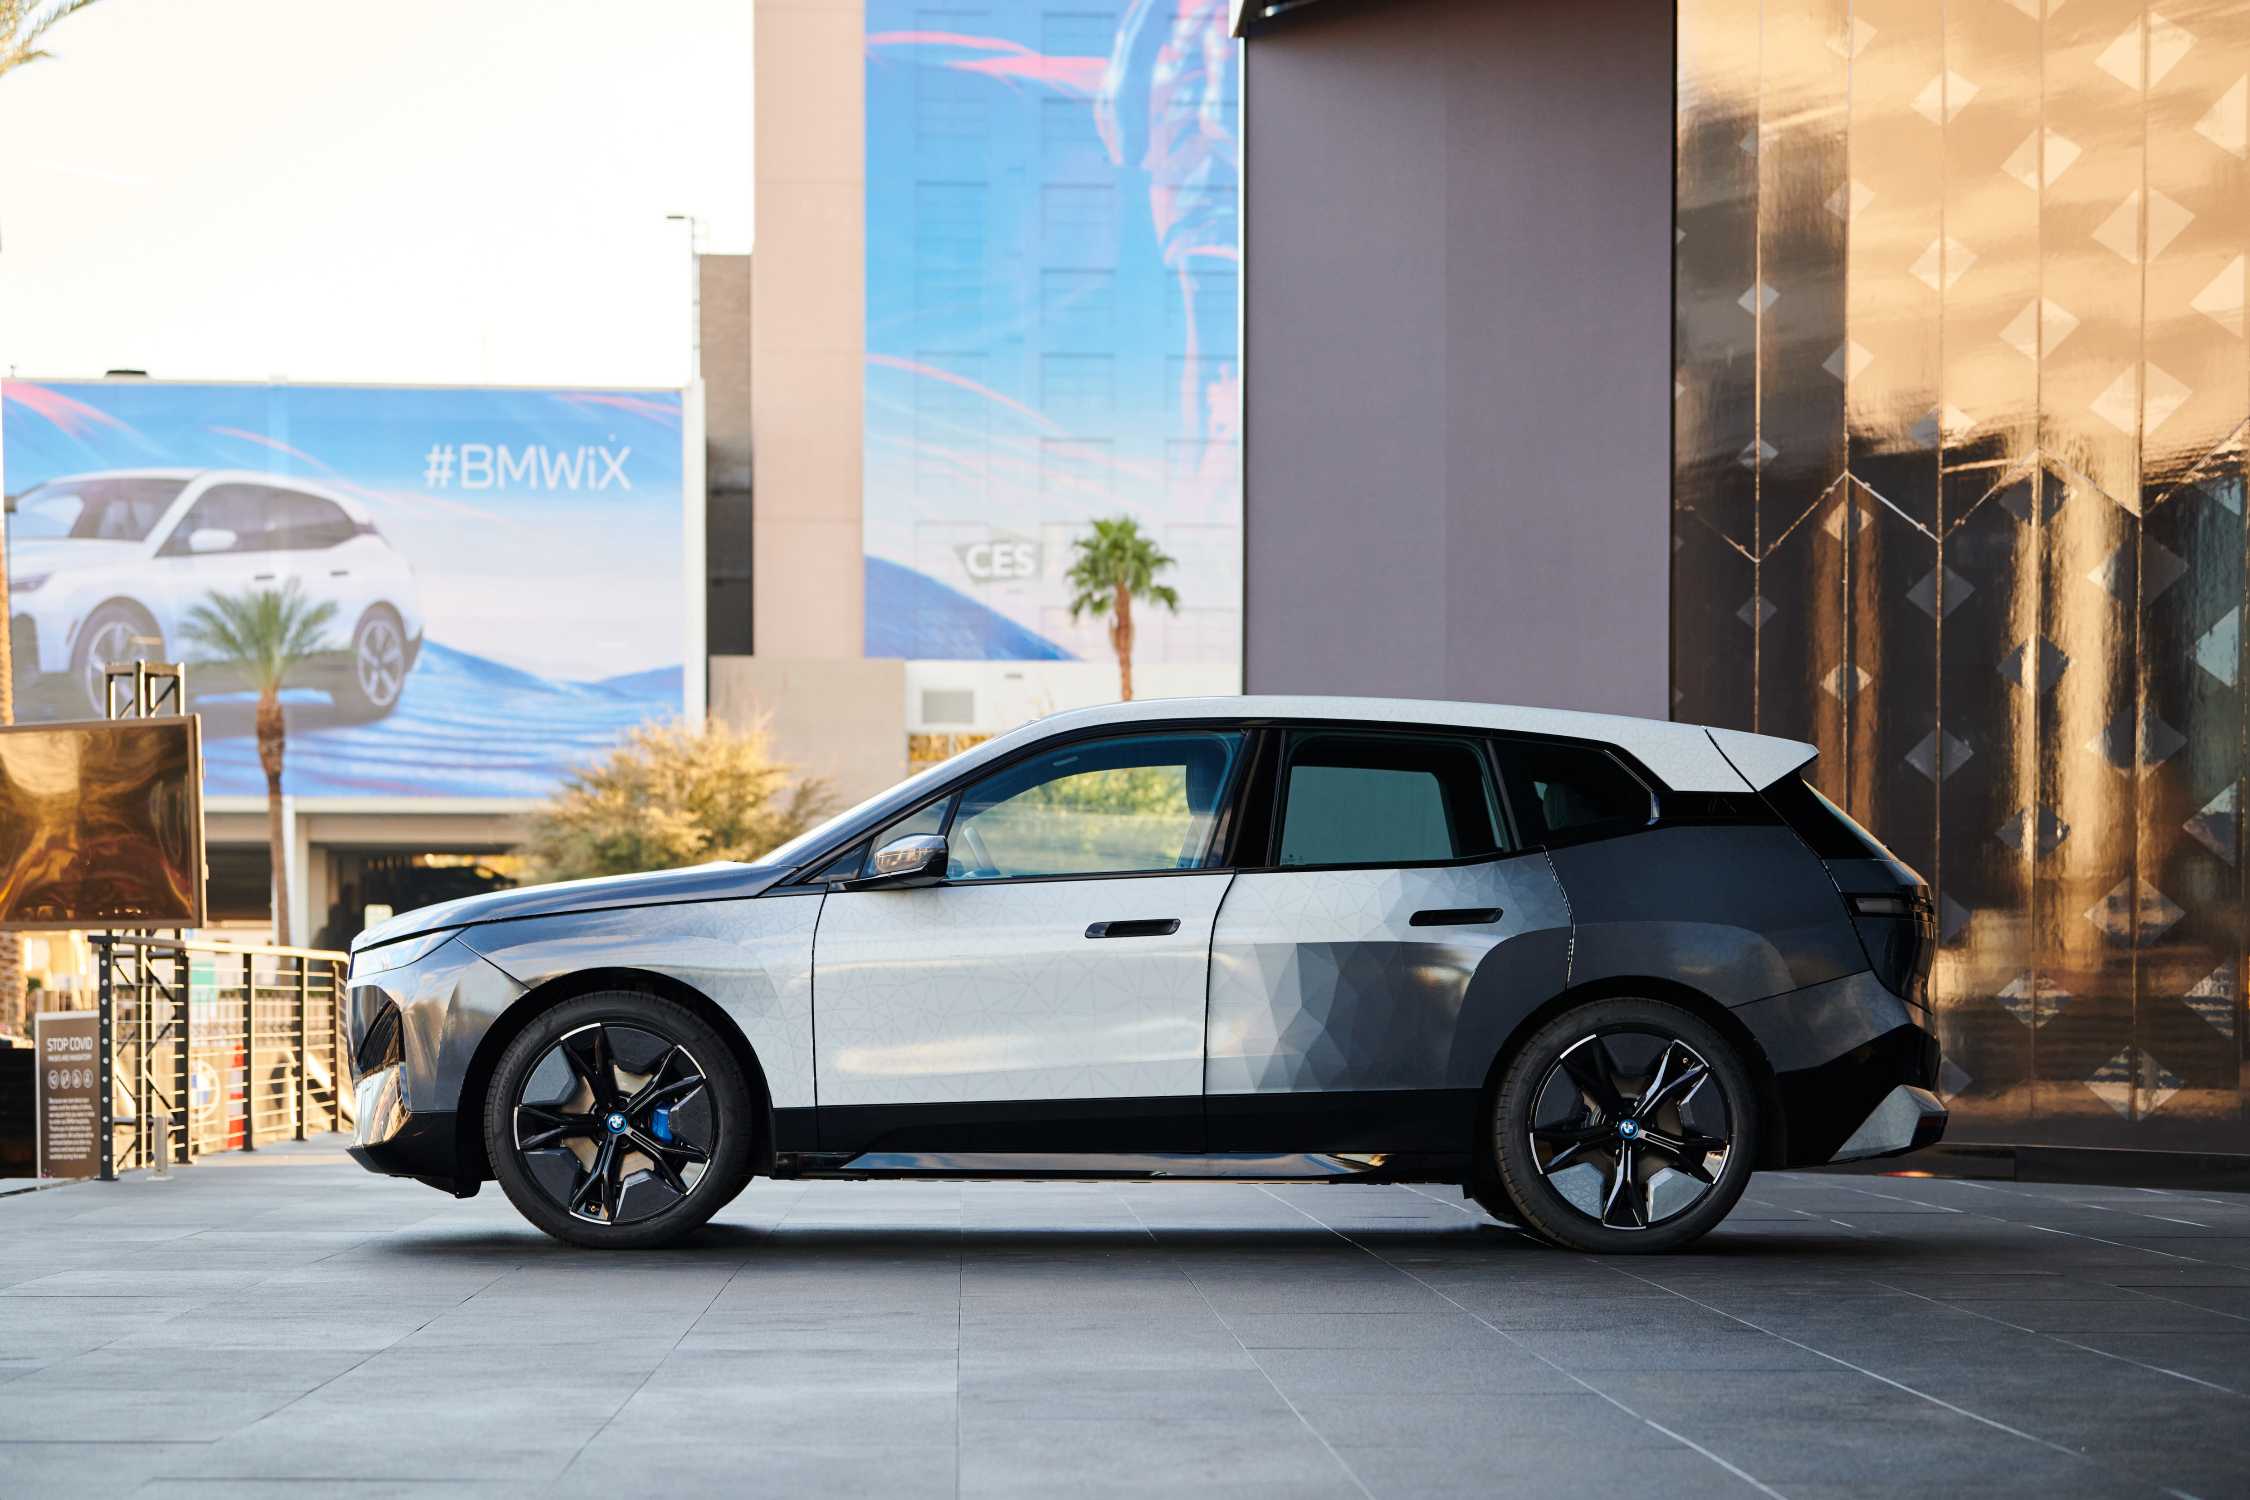 The BMW Group at the Consumer Electronics Show (CES) 2022.